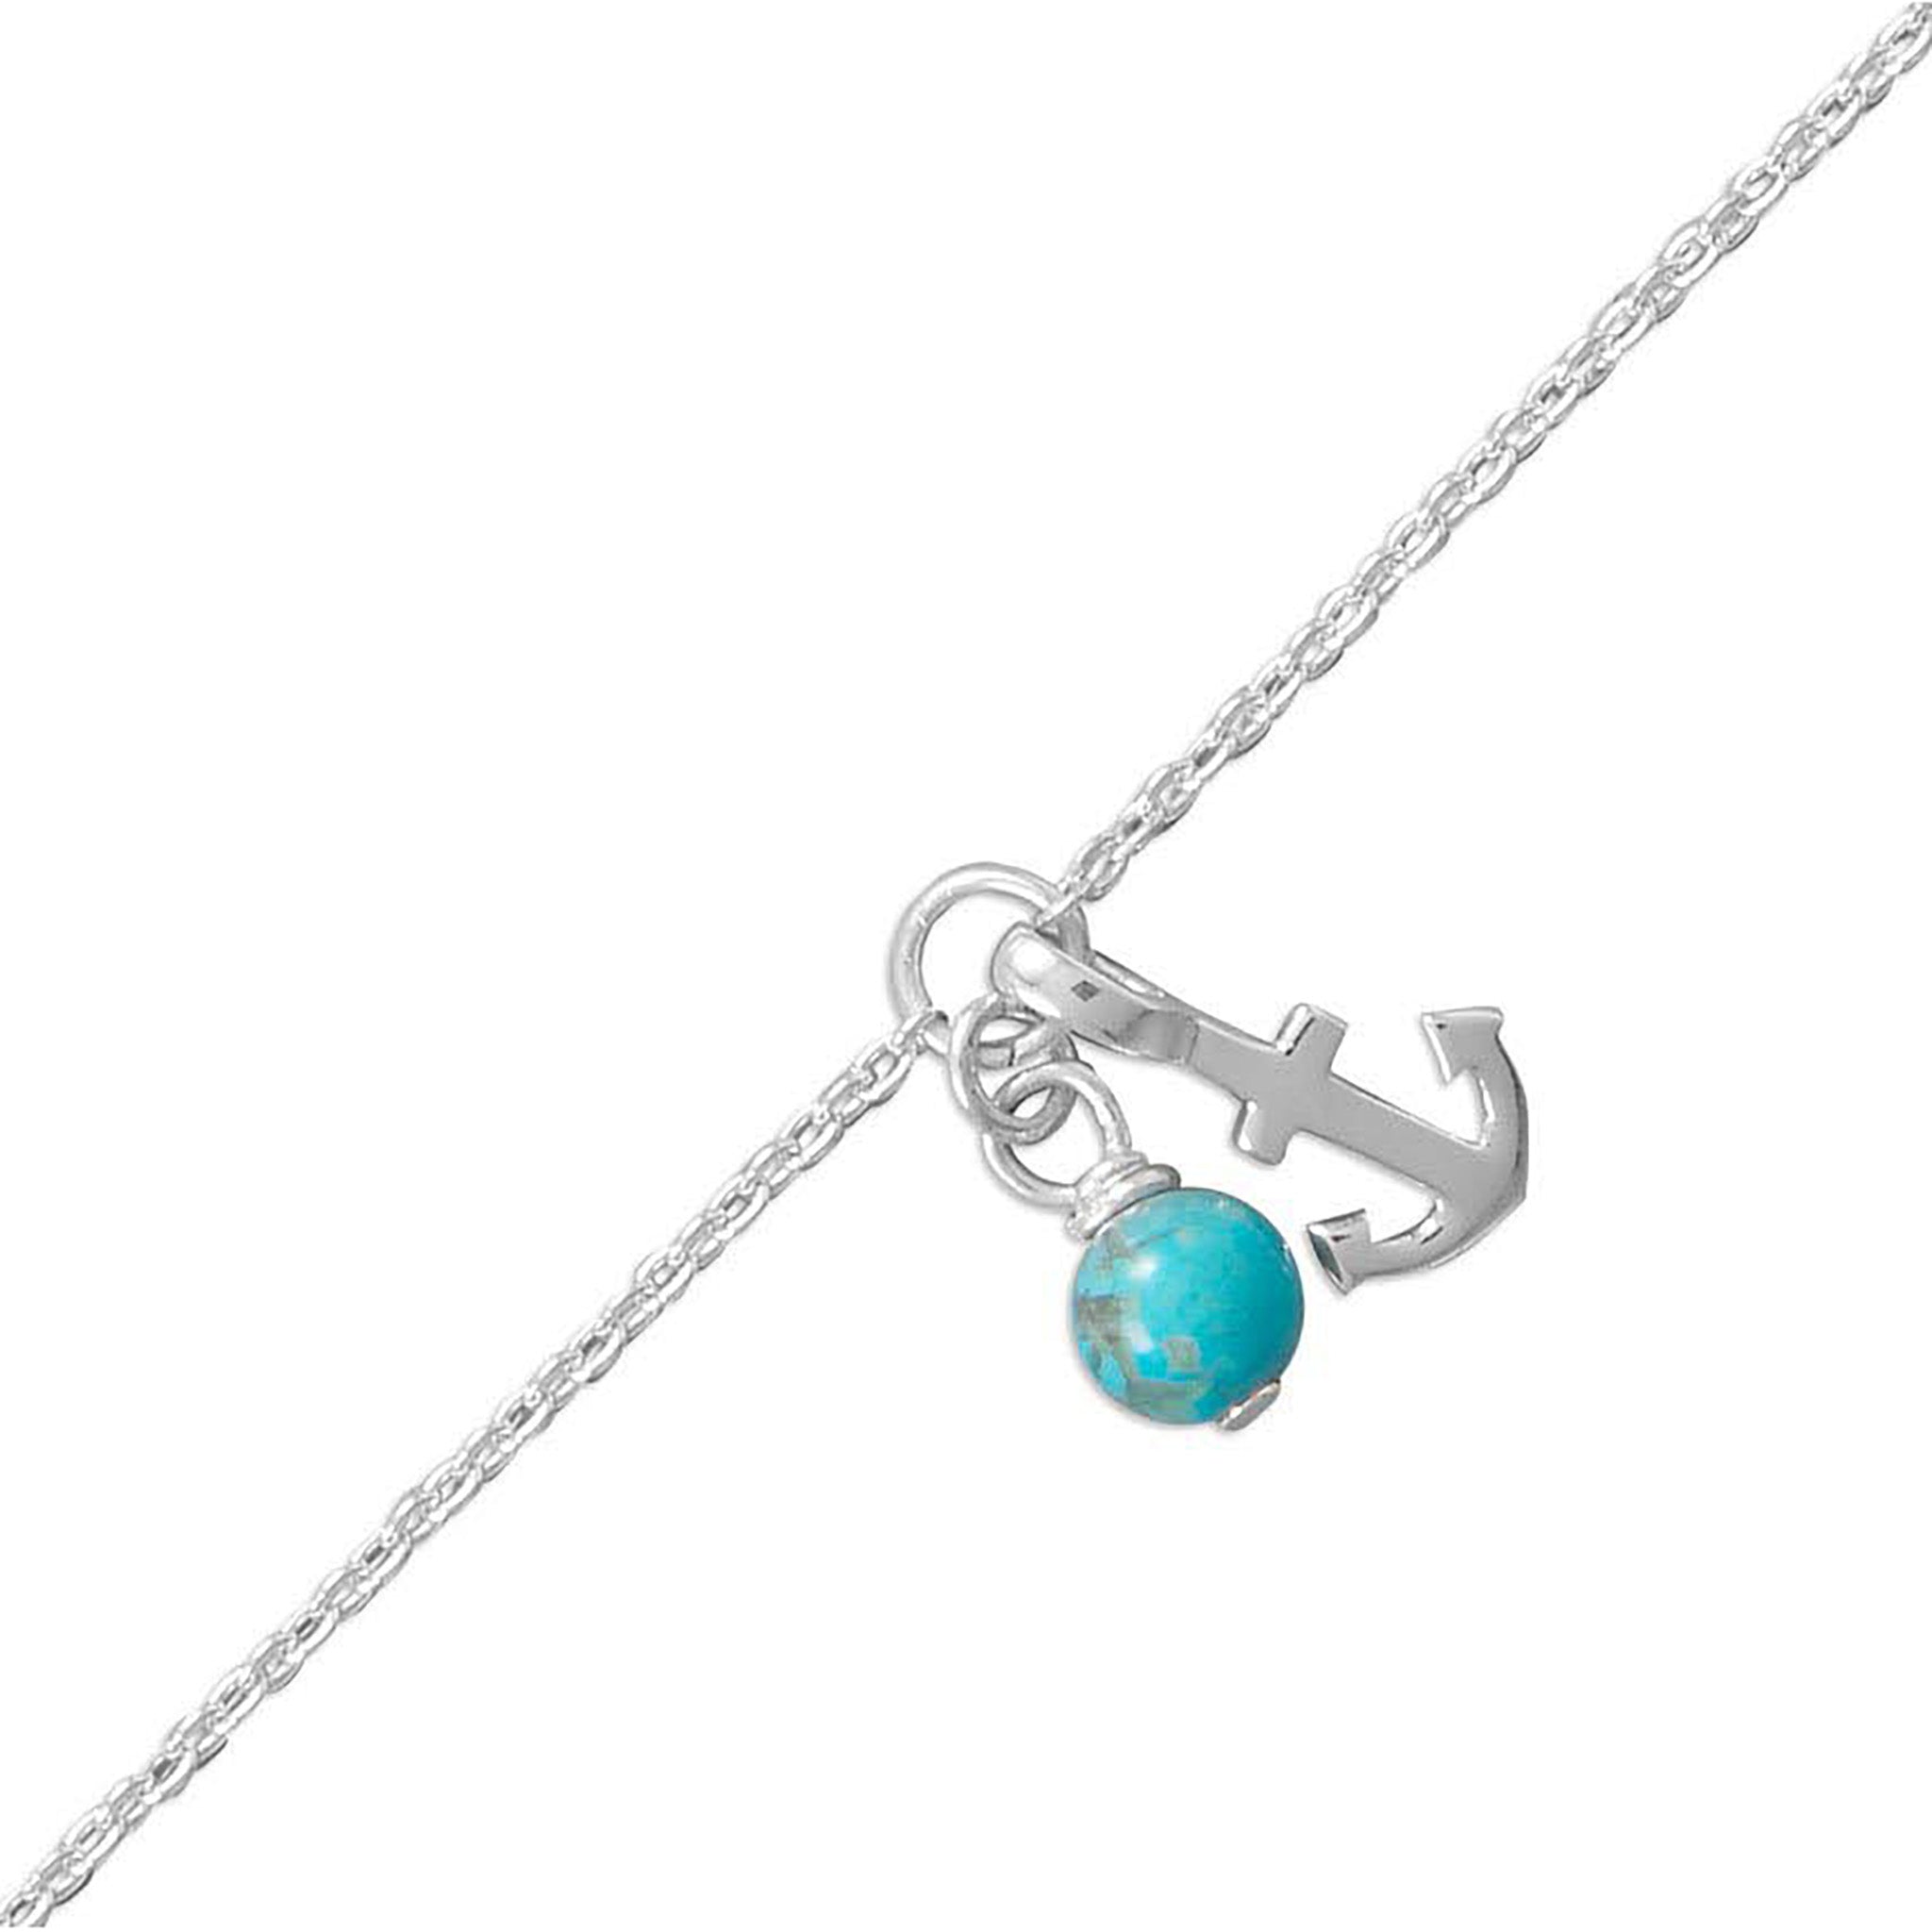 Anchor and Turquoise Bead Charm Anklet Close Up